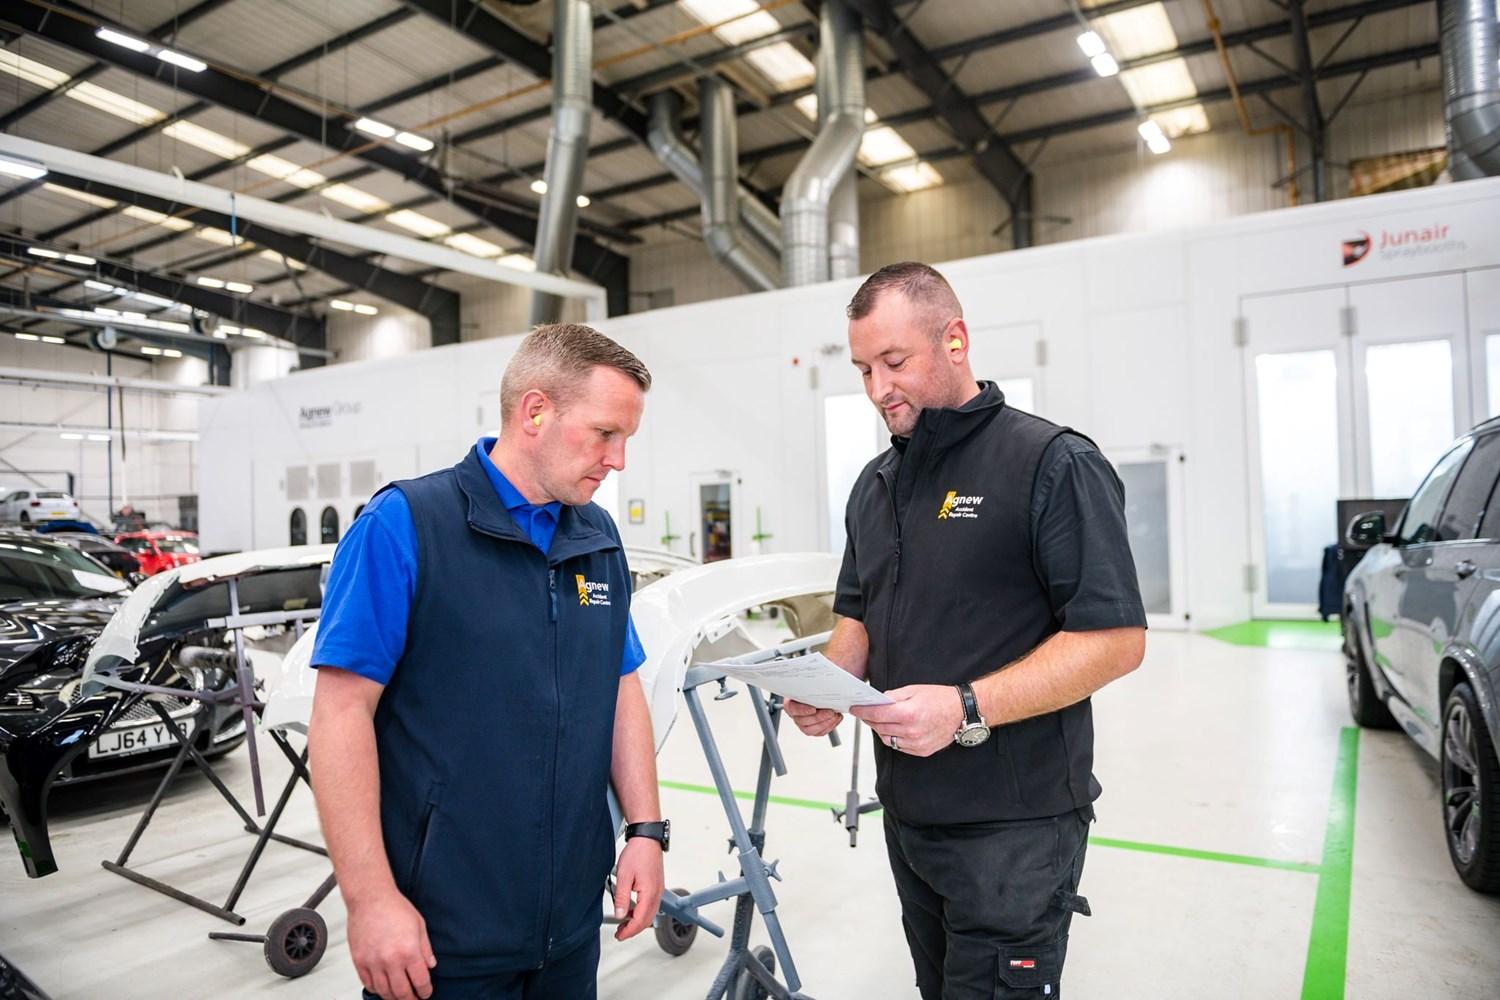 Two Agnew Repair Centre Repair Specialists discuss list of repairs to be made to a vehicle at the Agnew Repair Centre workshop, Belfast, Northern Ireland.